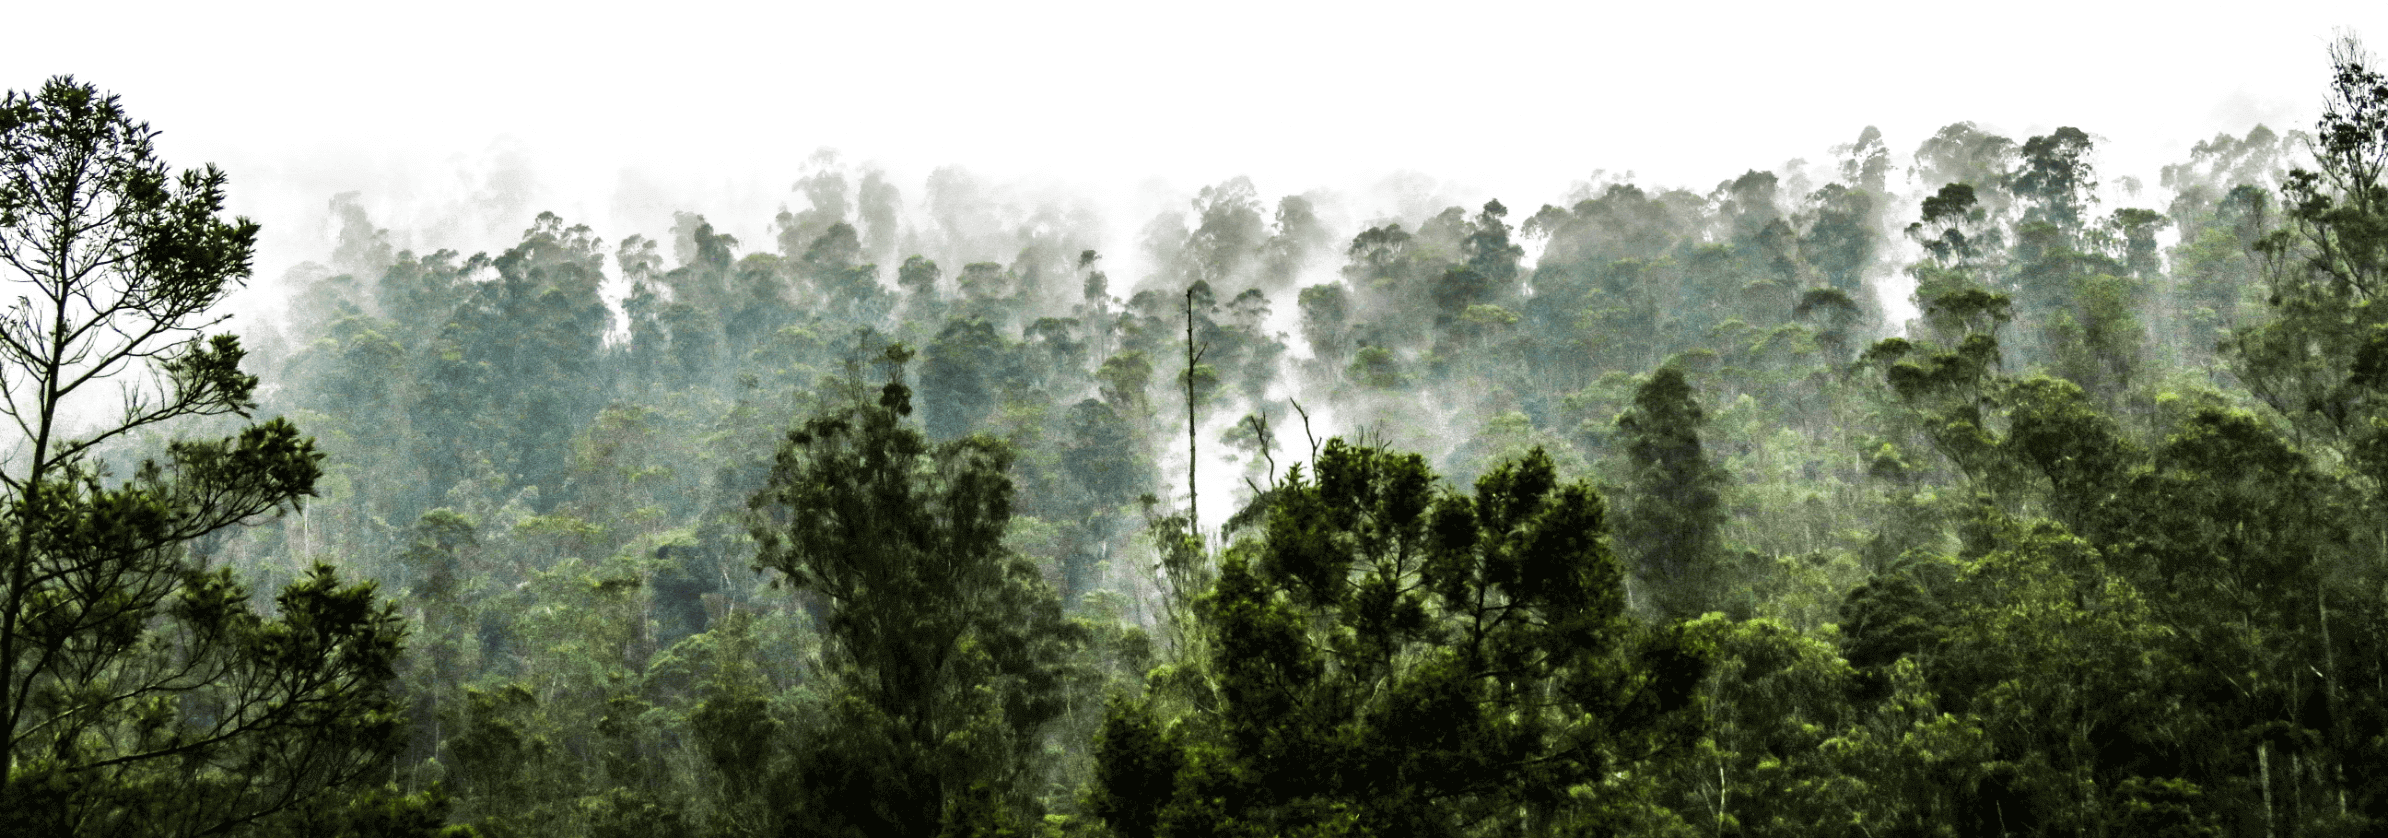 A foggy and humid rainforest